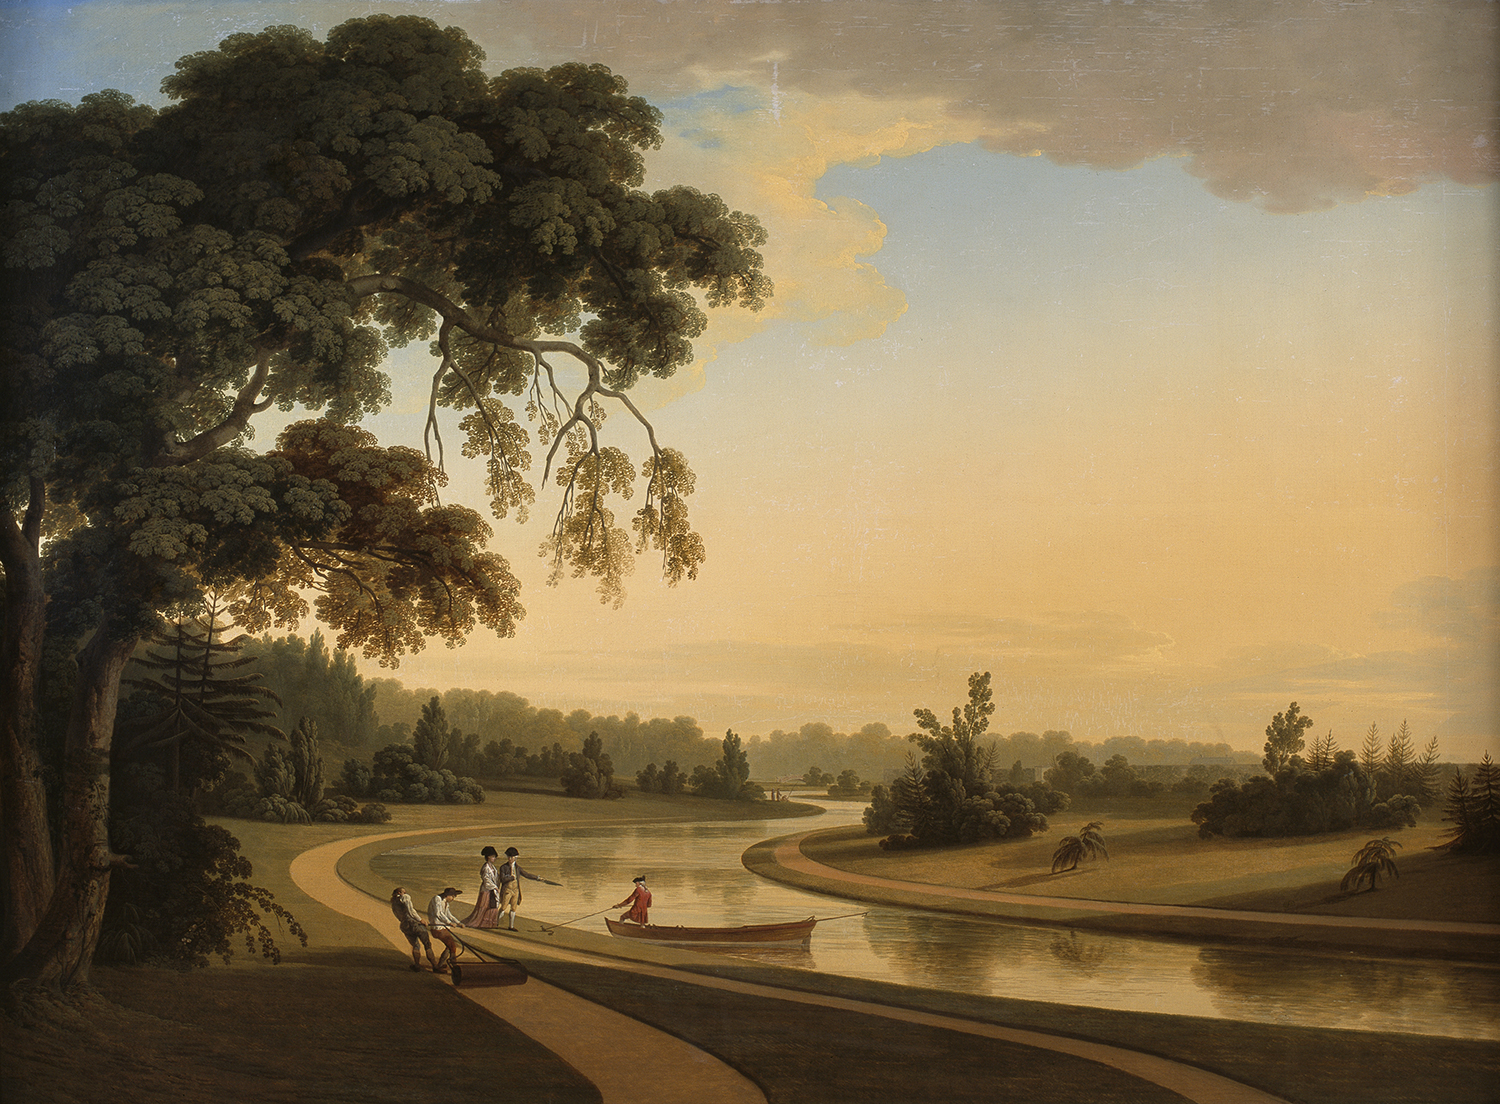 The Sheet of Water at Carton, County Kildare with the Duke and Duchess of Leinster and gardeners rolling a serpentine path, 1775 – 76.  Private Collection. Thomas Roberts. Carton was the birthplace of  patriot Lord Edward Fitzgerald, son of the first Duke and Duchess of Leinster. 